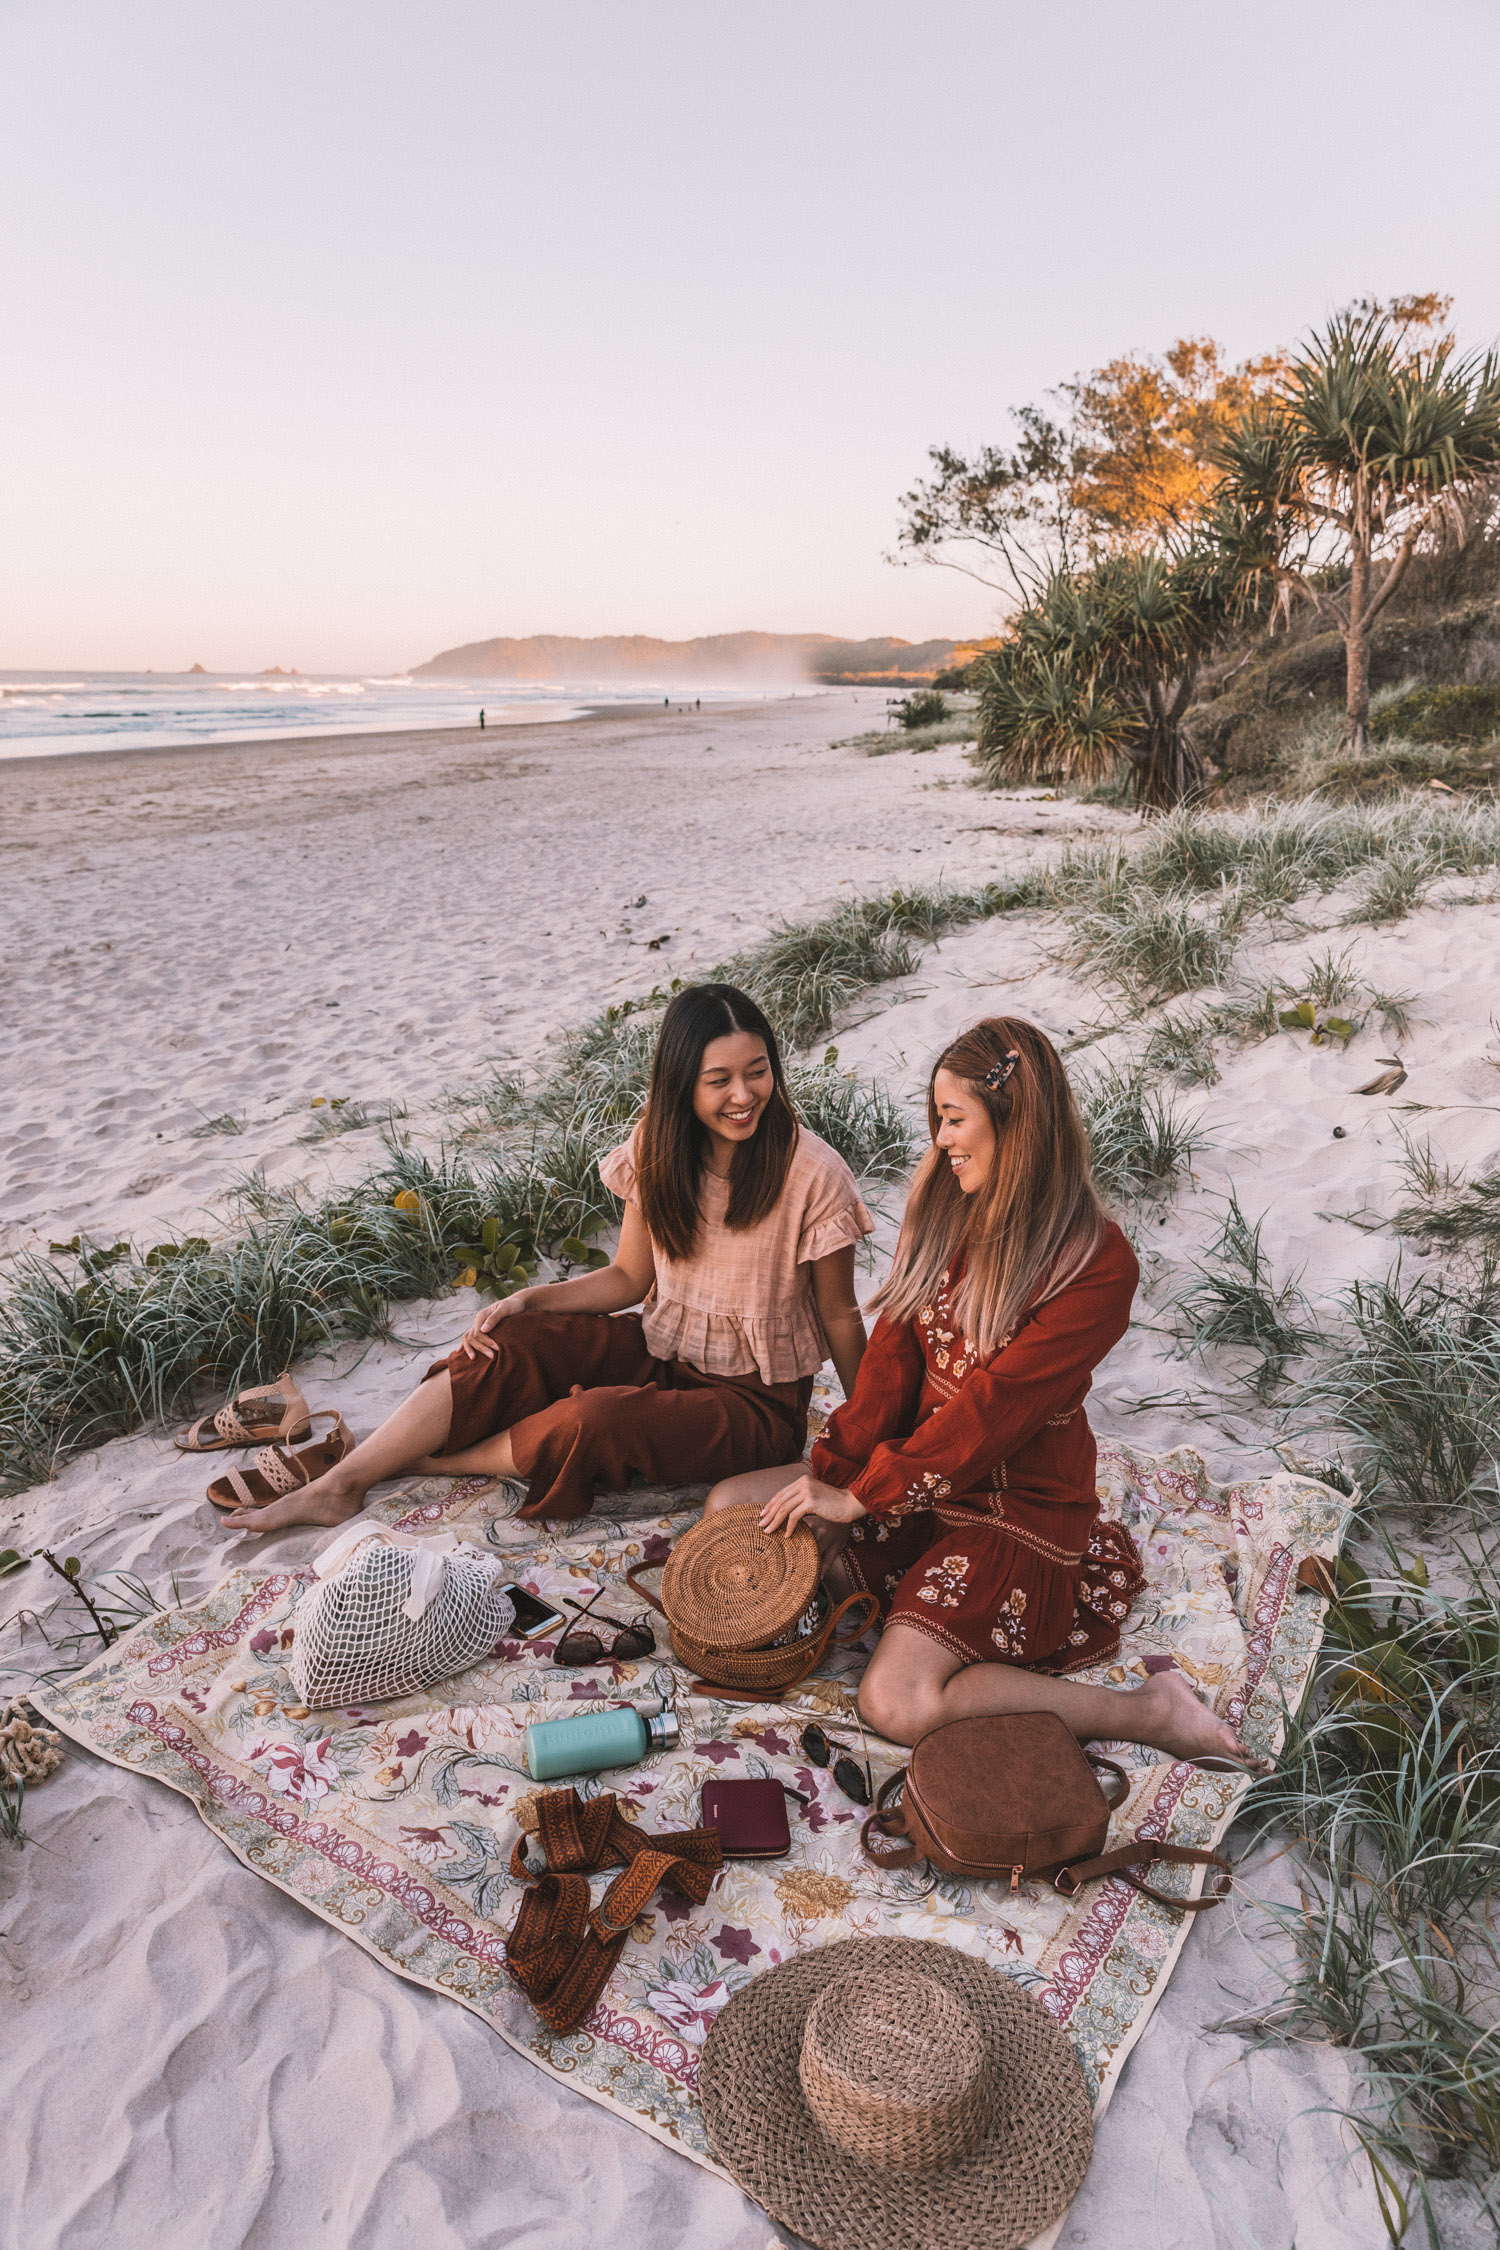 Byron Bay Travel Guide - Things to see, eat and shop! — CONNIE AND LUNA